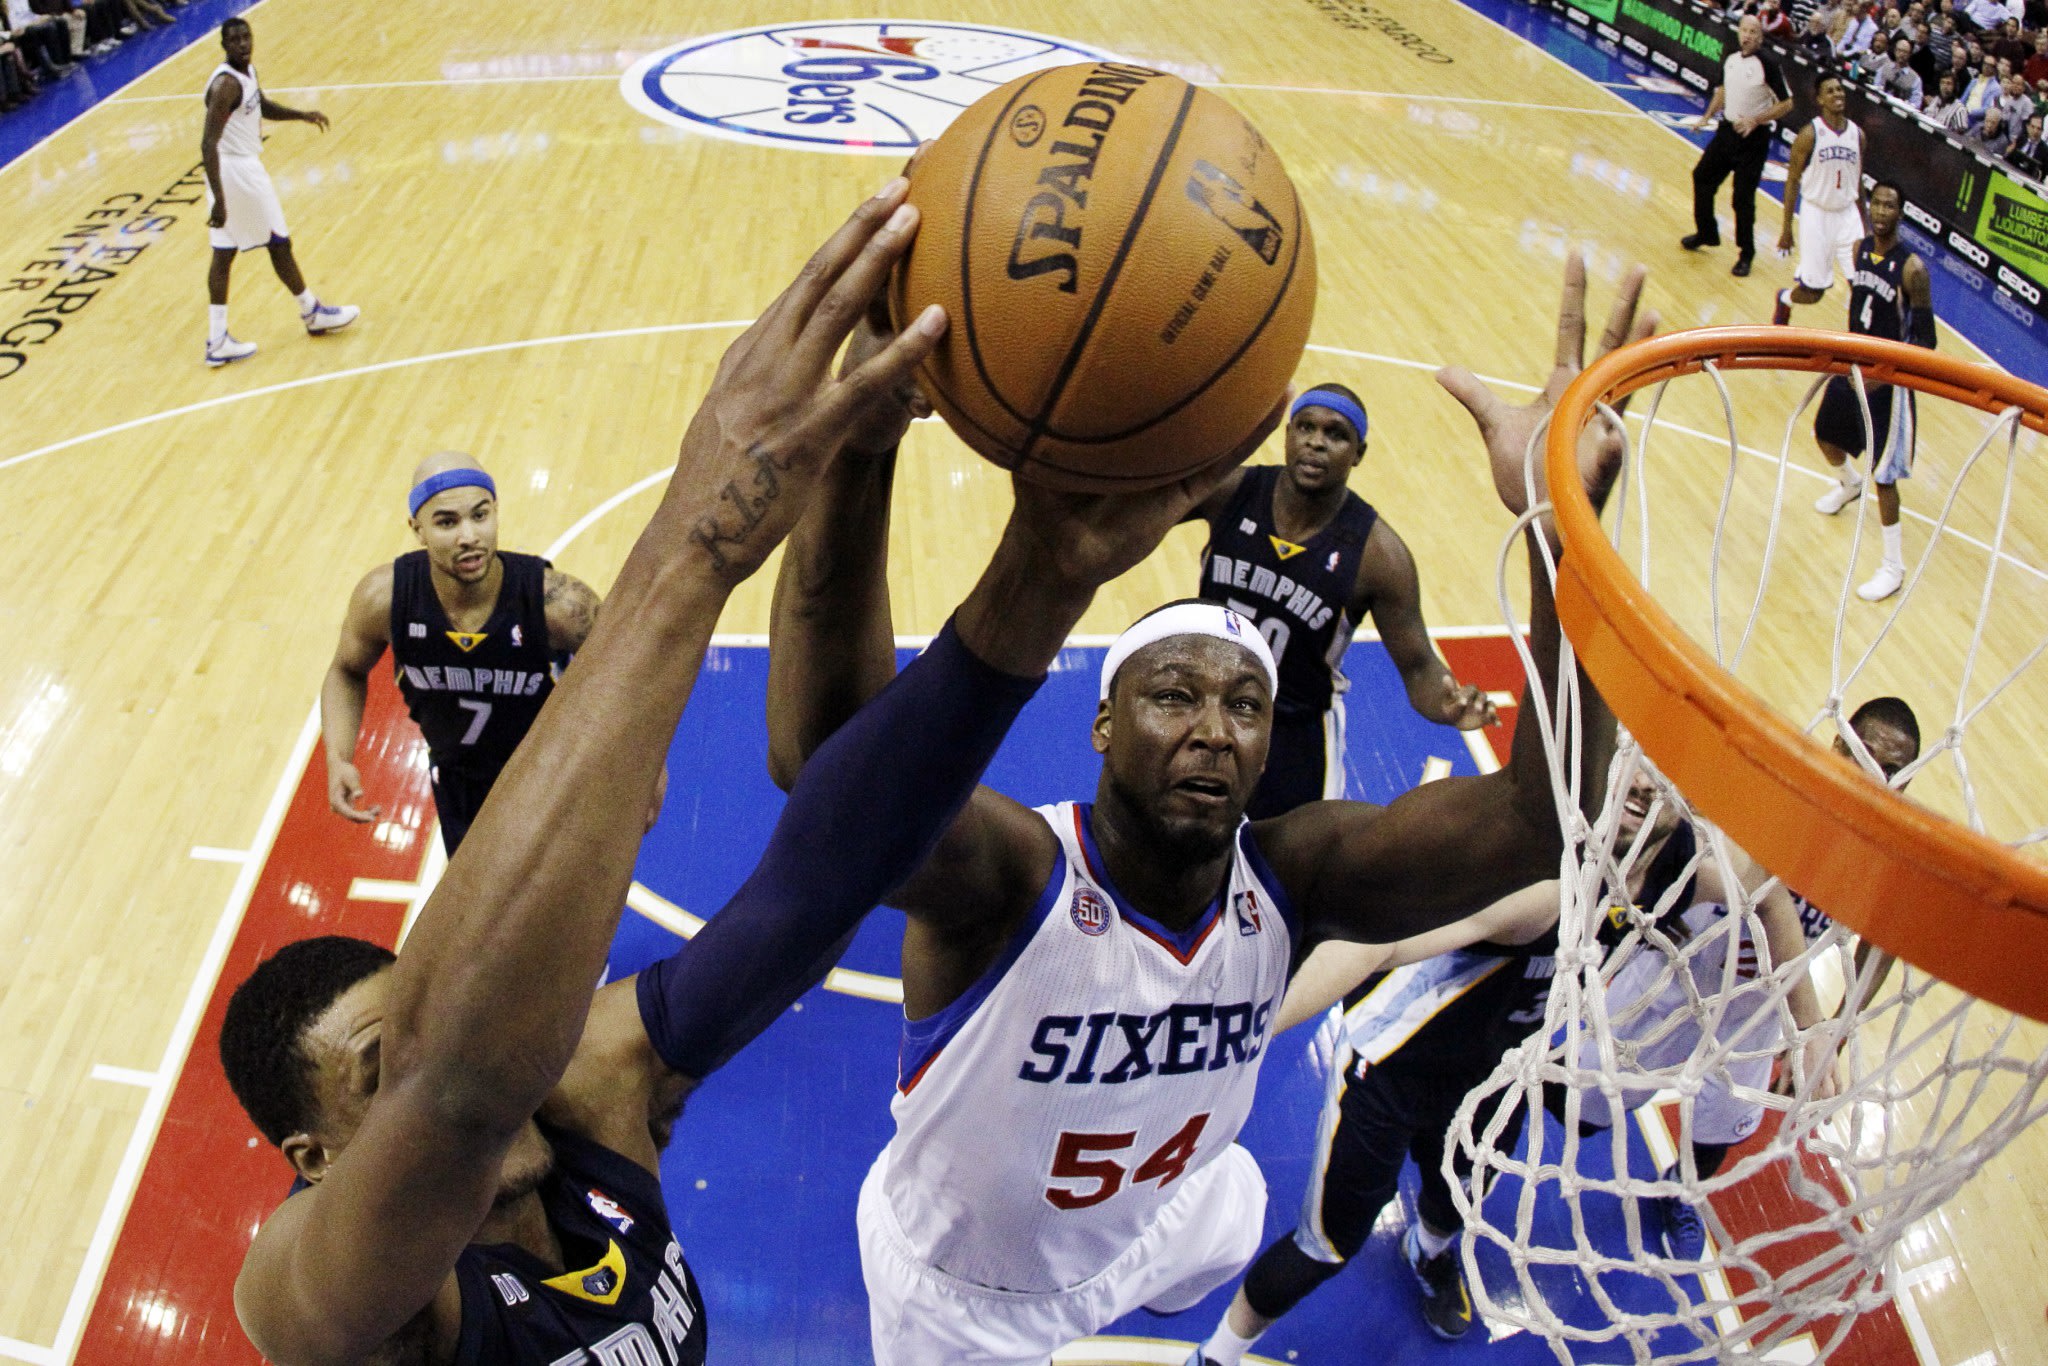 More than three years after his last NBA appearance, Kwame Brown (center) appears intent on making a comeback. (AP/Matt Slocum)